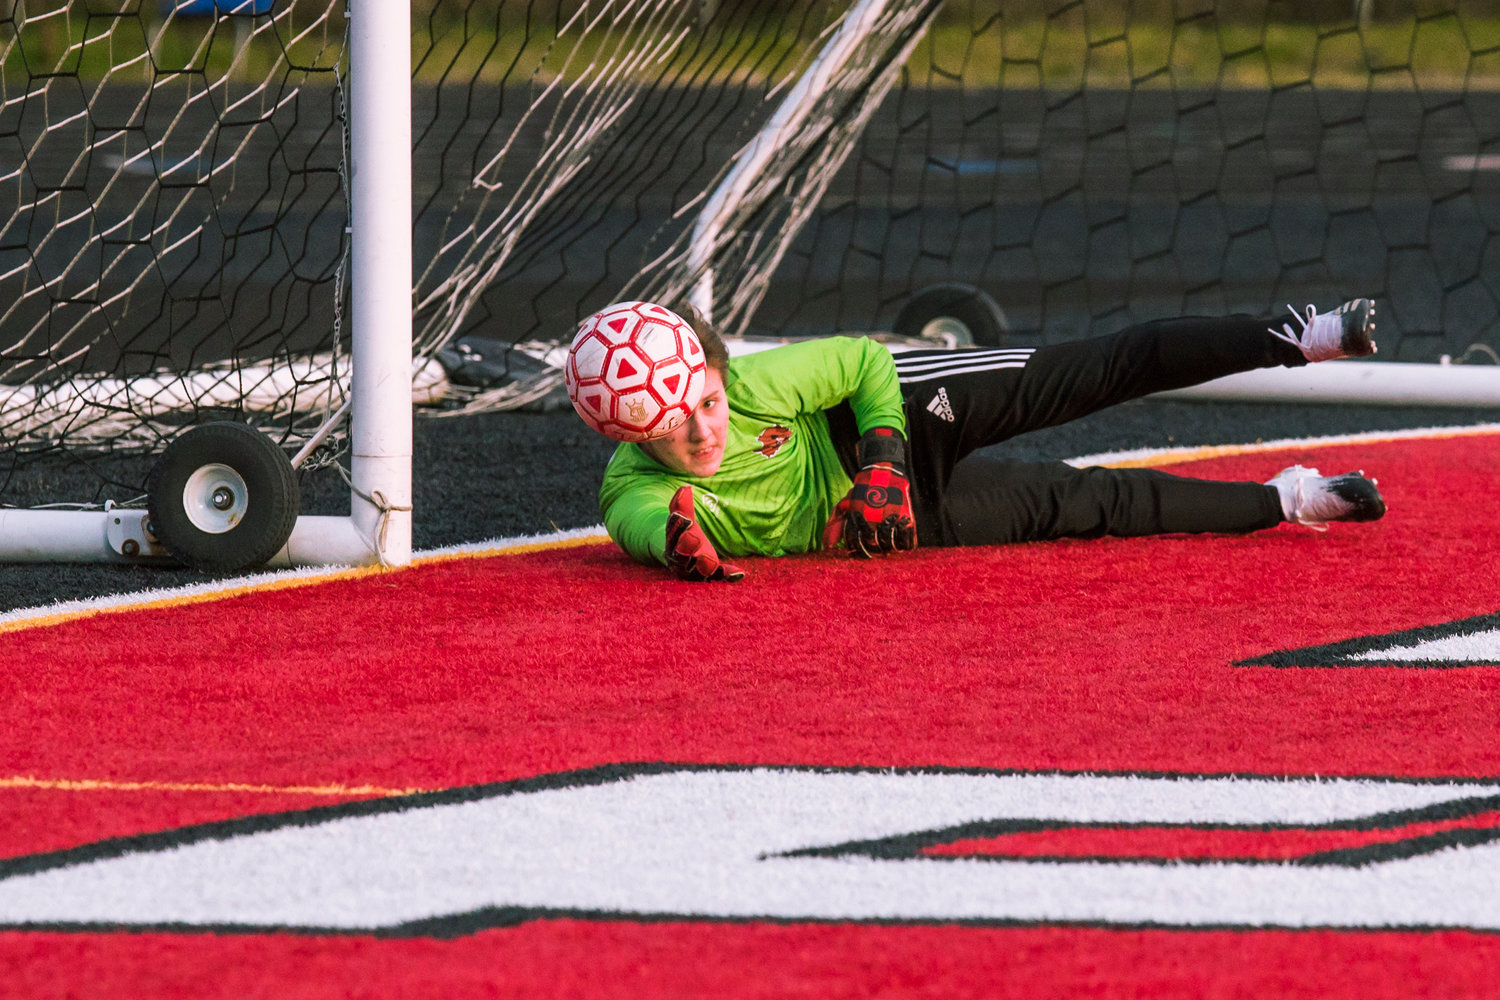 Tenino's goal keeper makes a save during a game against Forks on Friday at Beaver Stadium.